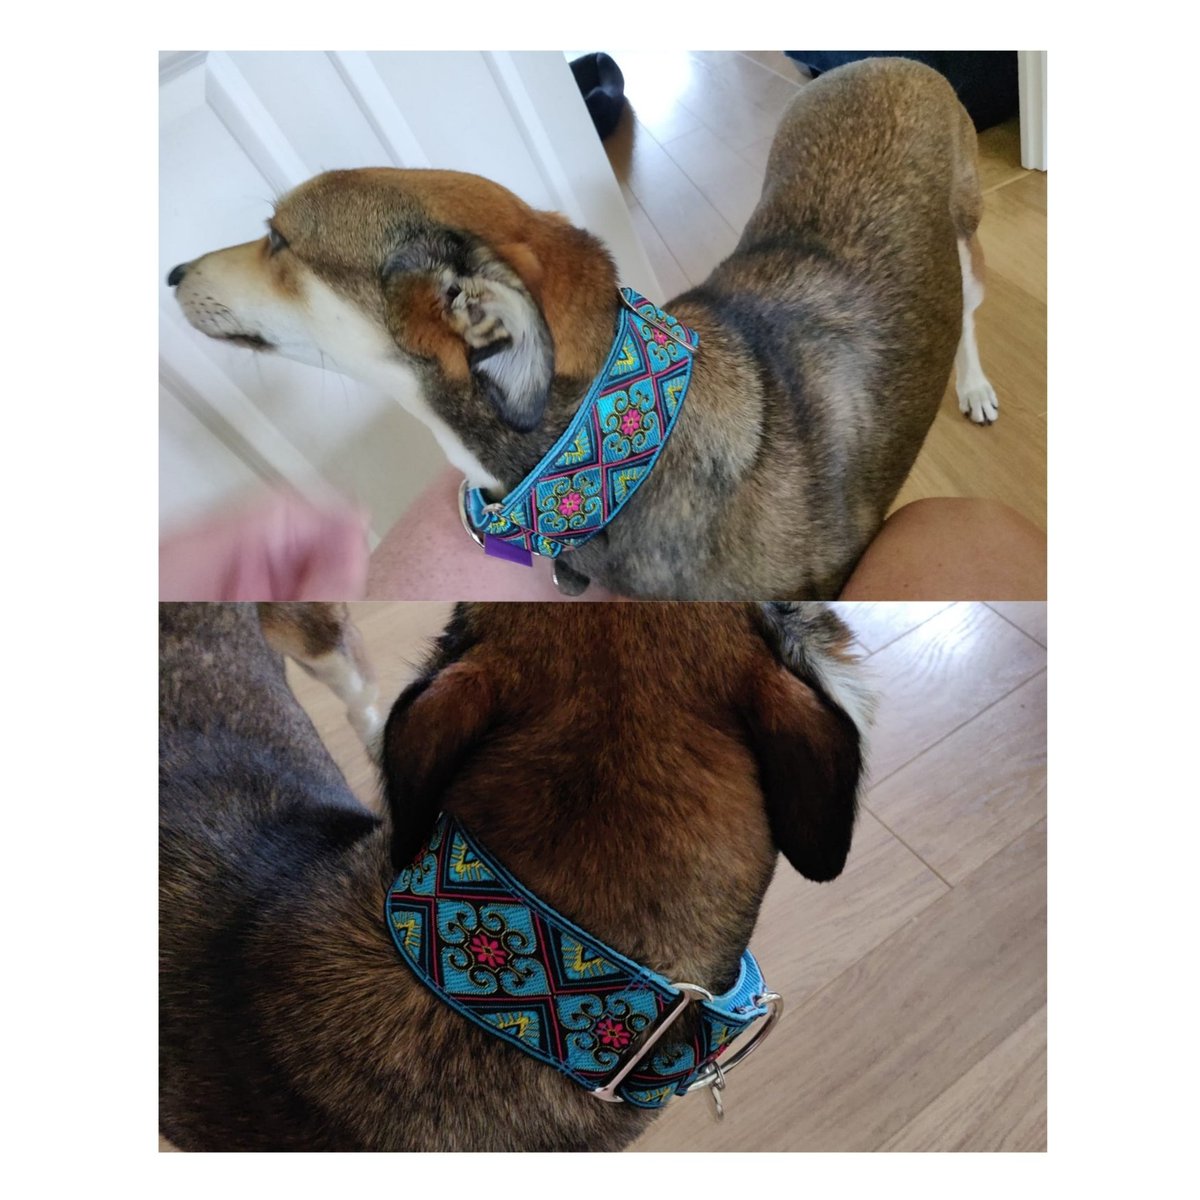 Can't recommend @Houndland_ie enough. This beautiful collar arrived so quickly...our son wishes they made guitar straps! I know they donate collars to KWWSPCA, which is full of sight hounds (like our girl Kerrie) looking for a new home!